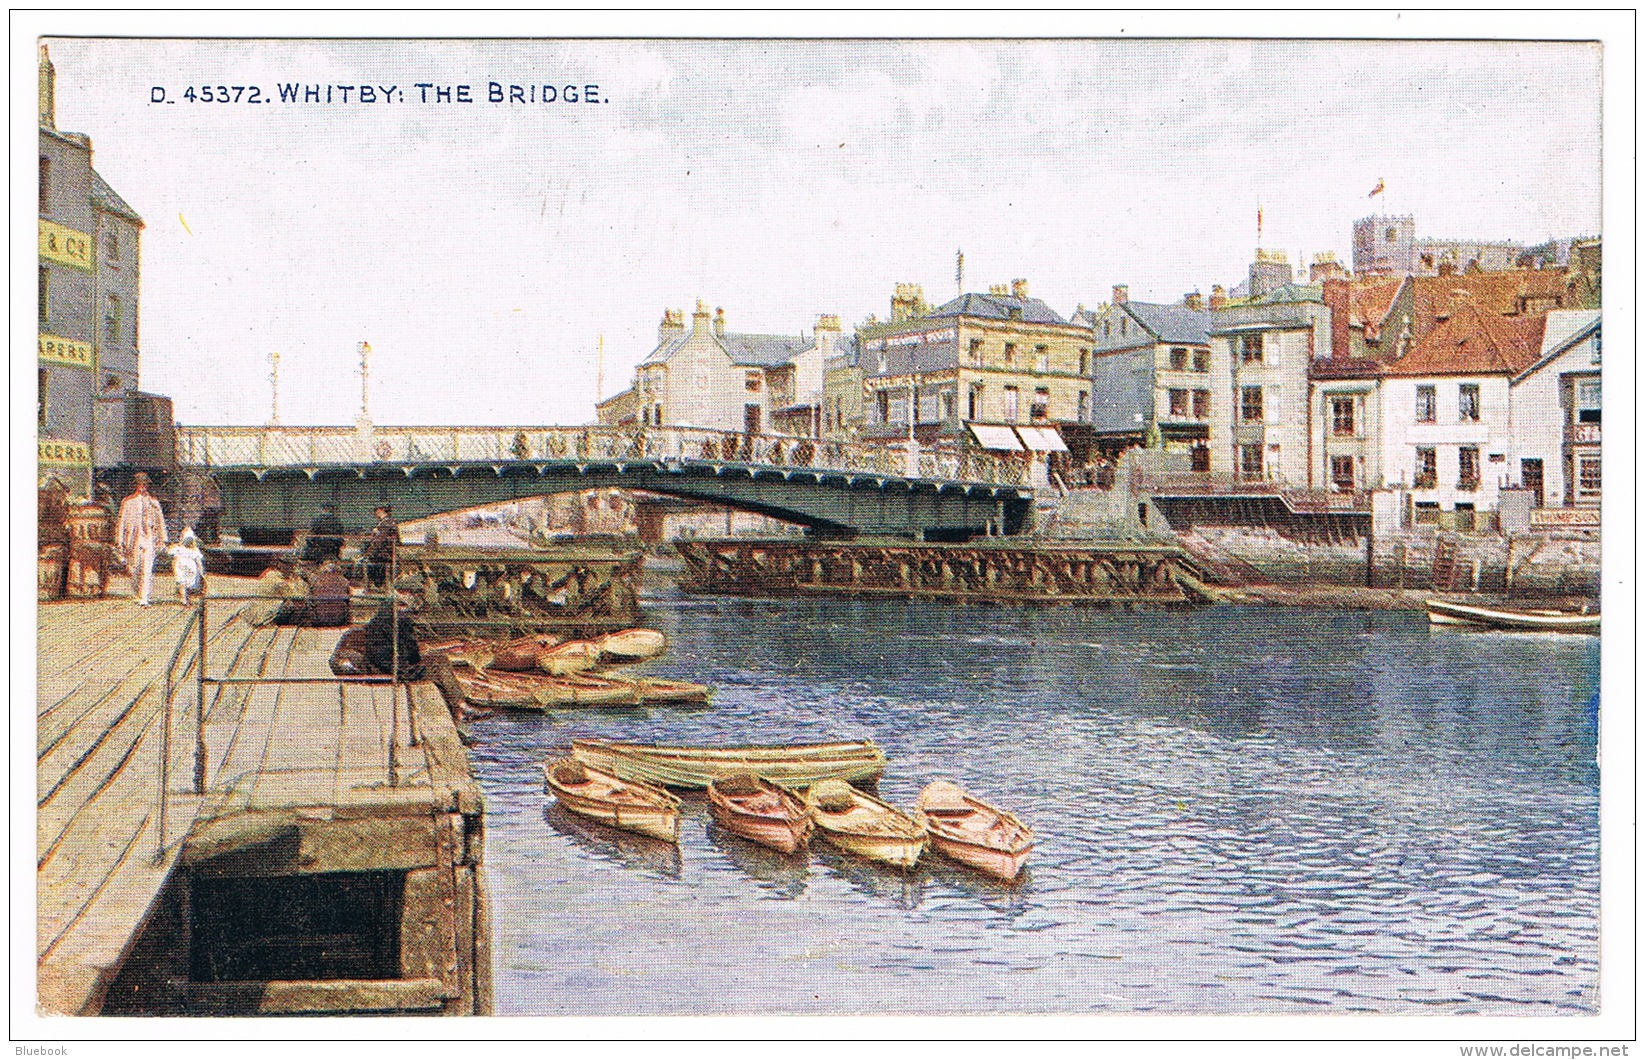 RB 1171 - Early Photochrom Postcard - The Bridge Whitby - Yorkshire - Whitby